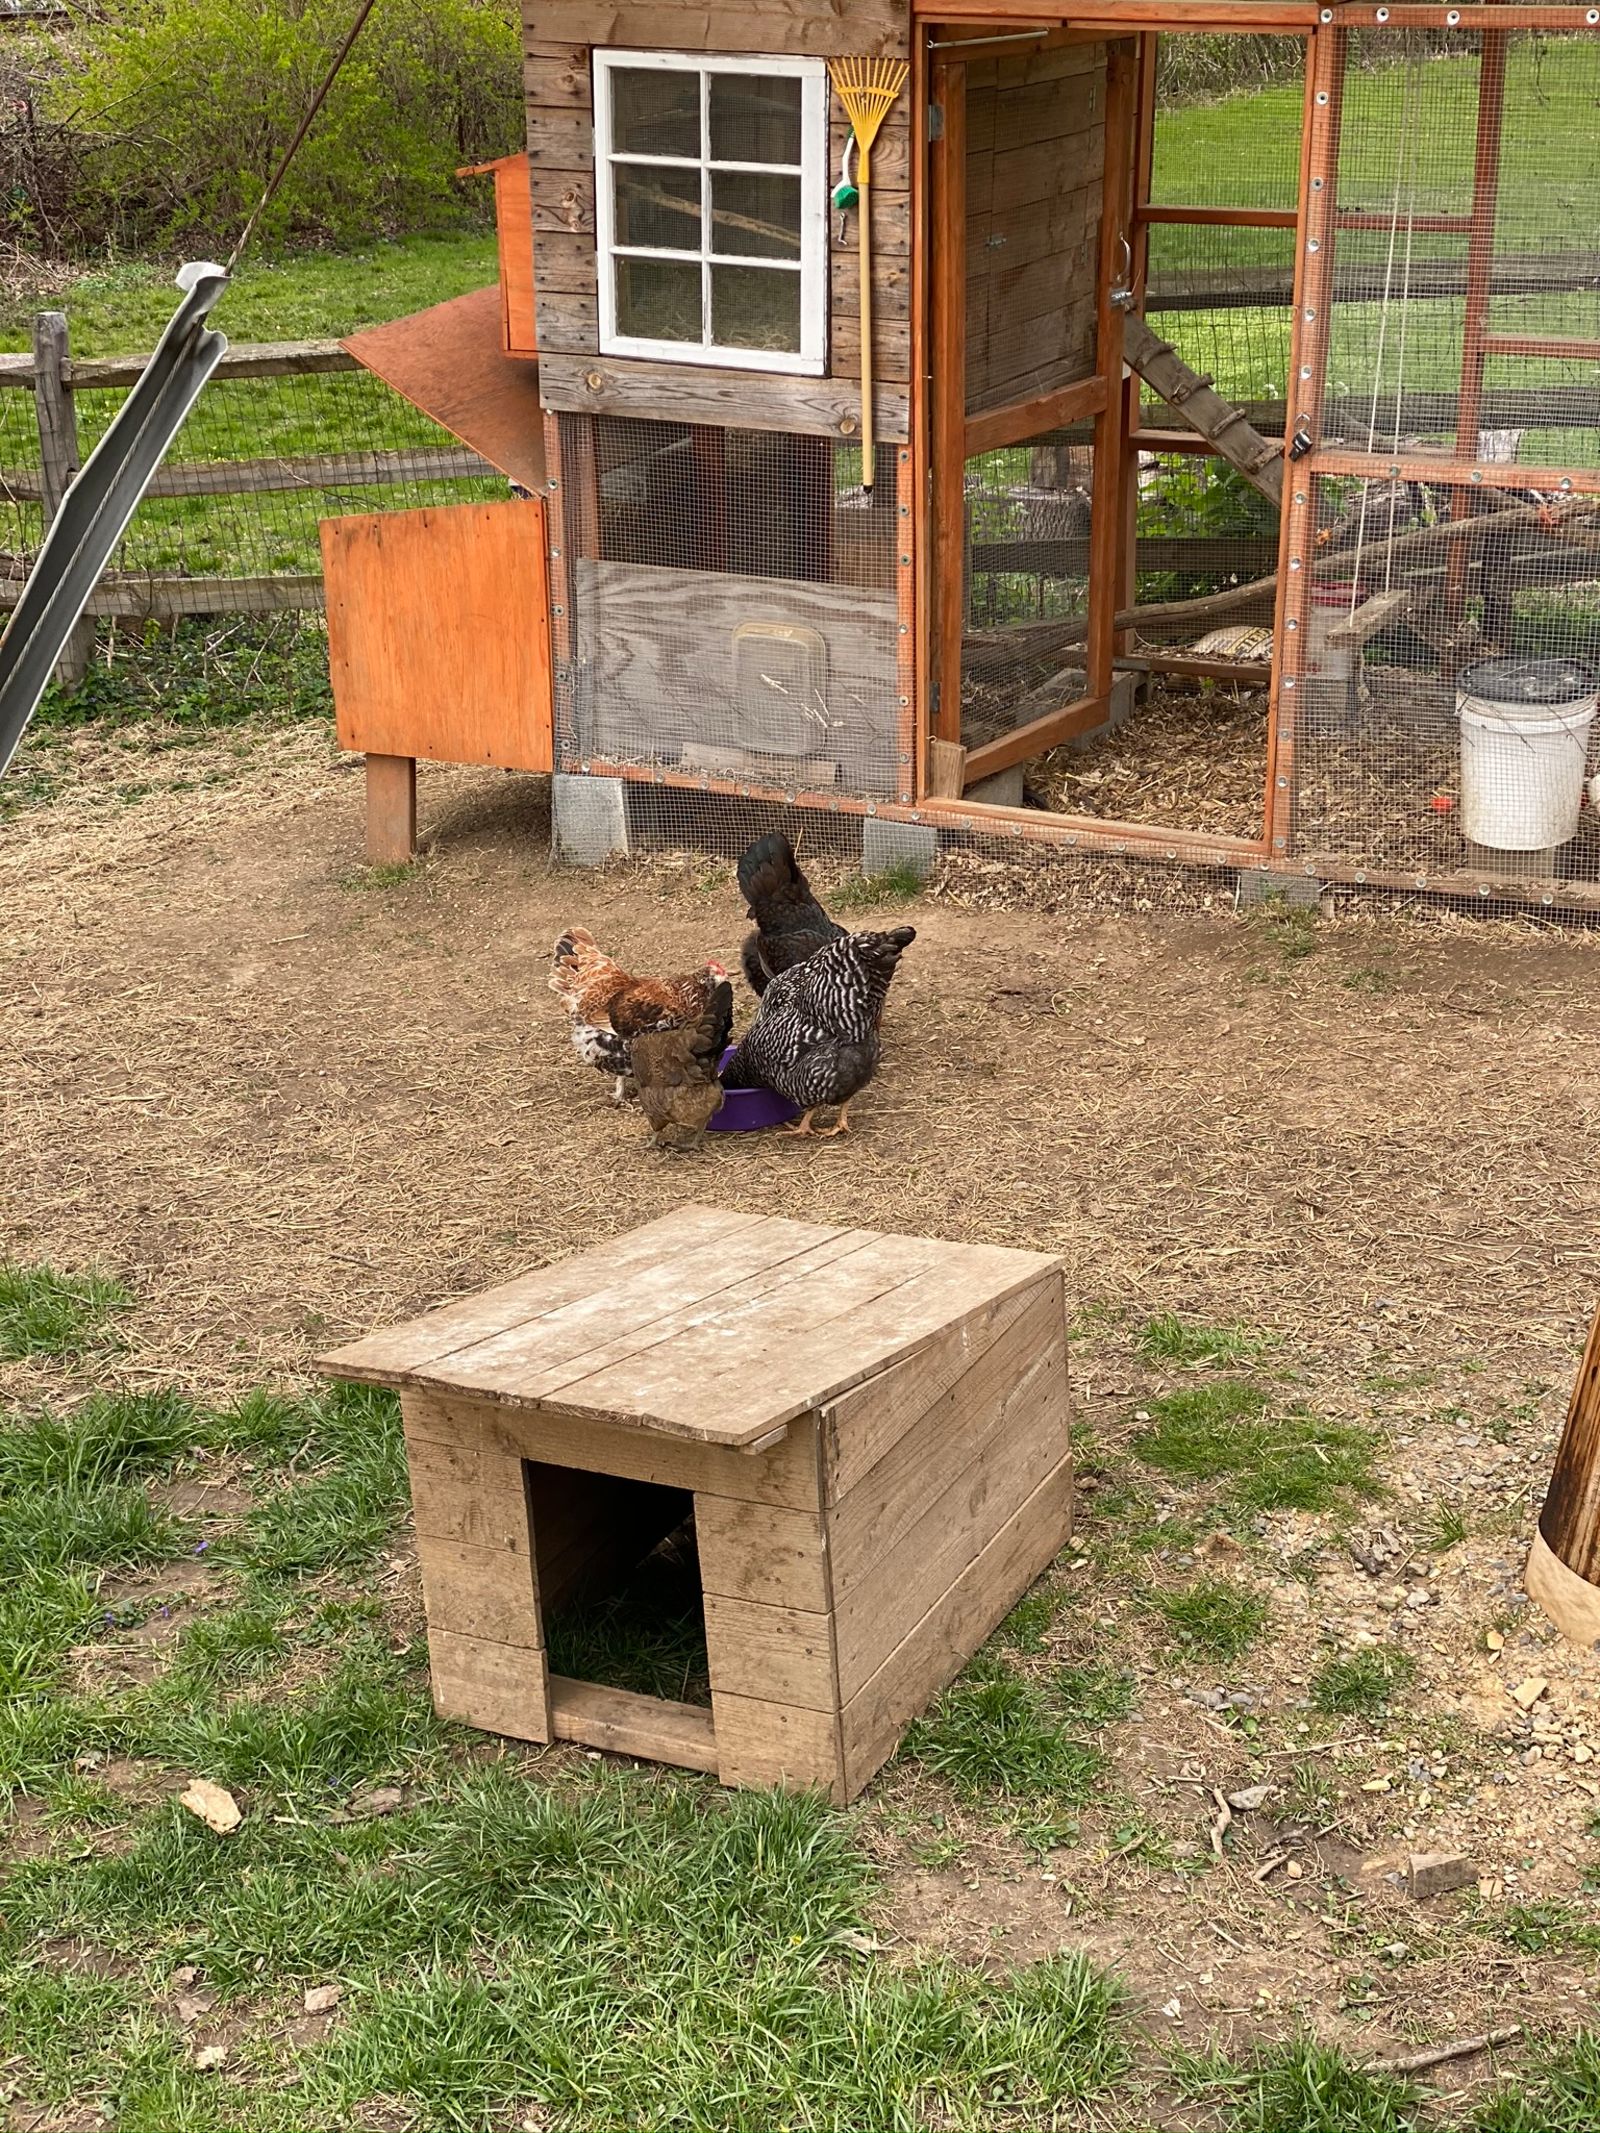 This is a duck house I built freehand. It’s nothing special but I’m really proud of it. My boy Lawrence (actually a girl) loves it